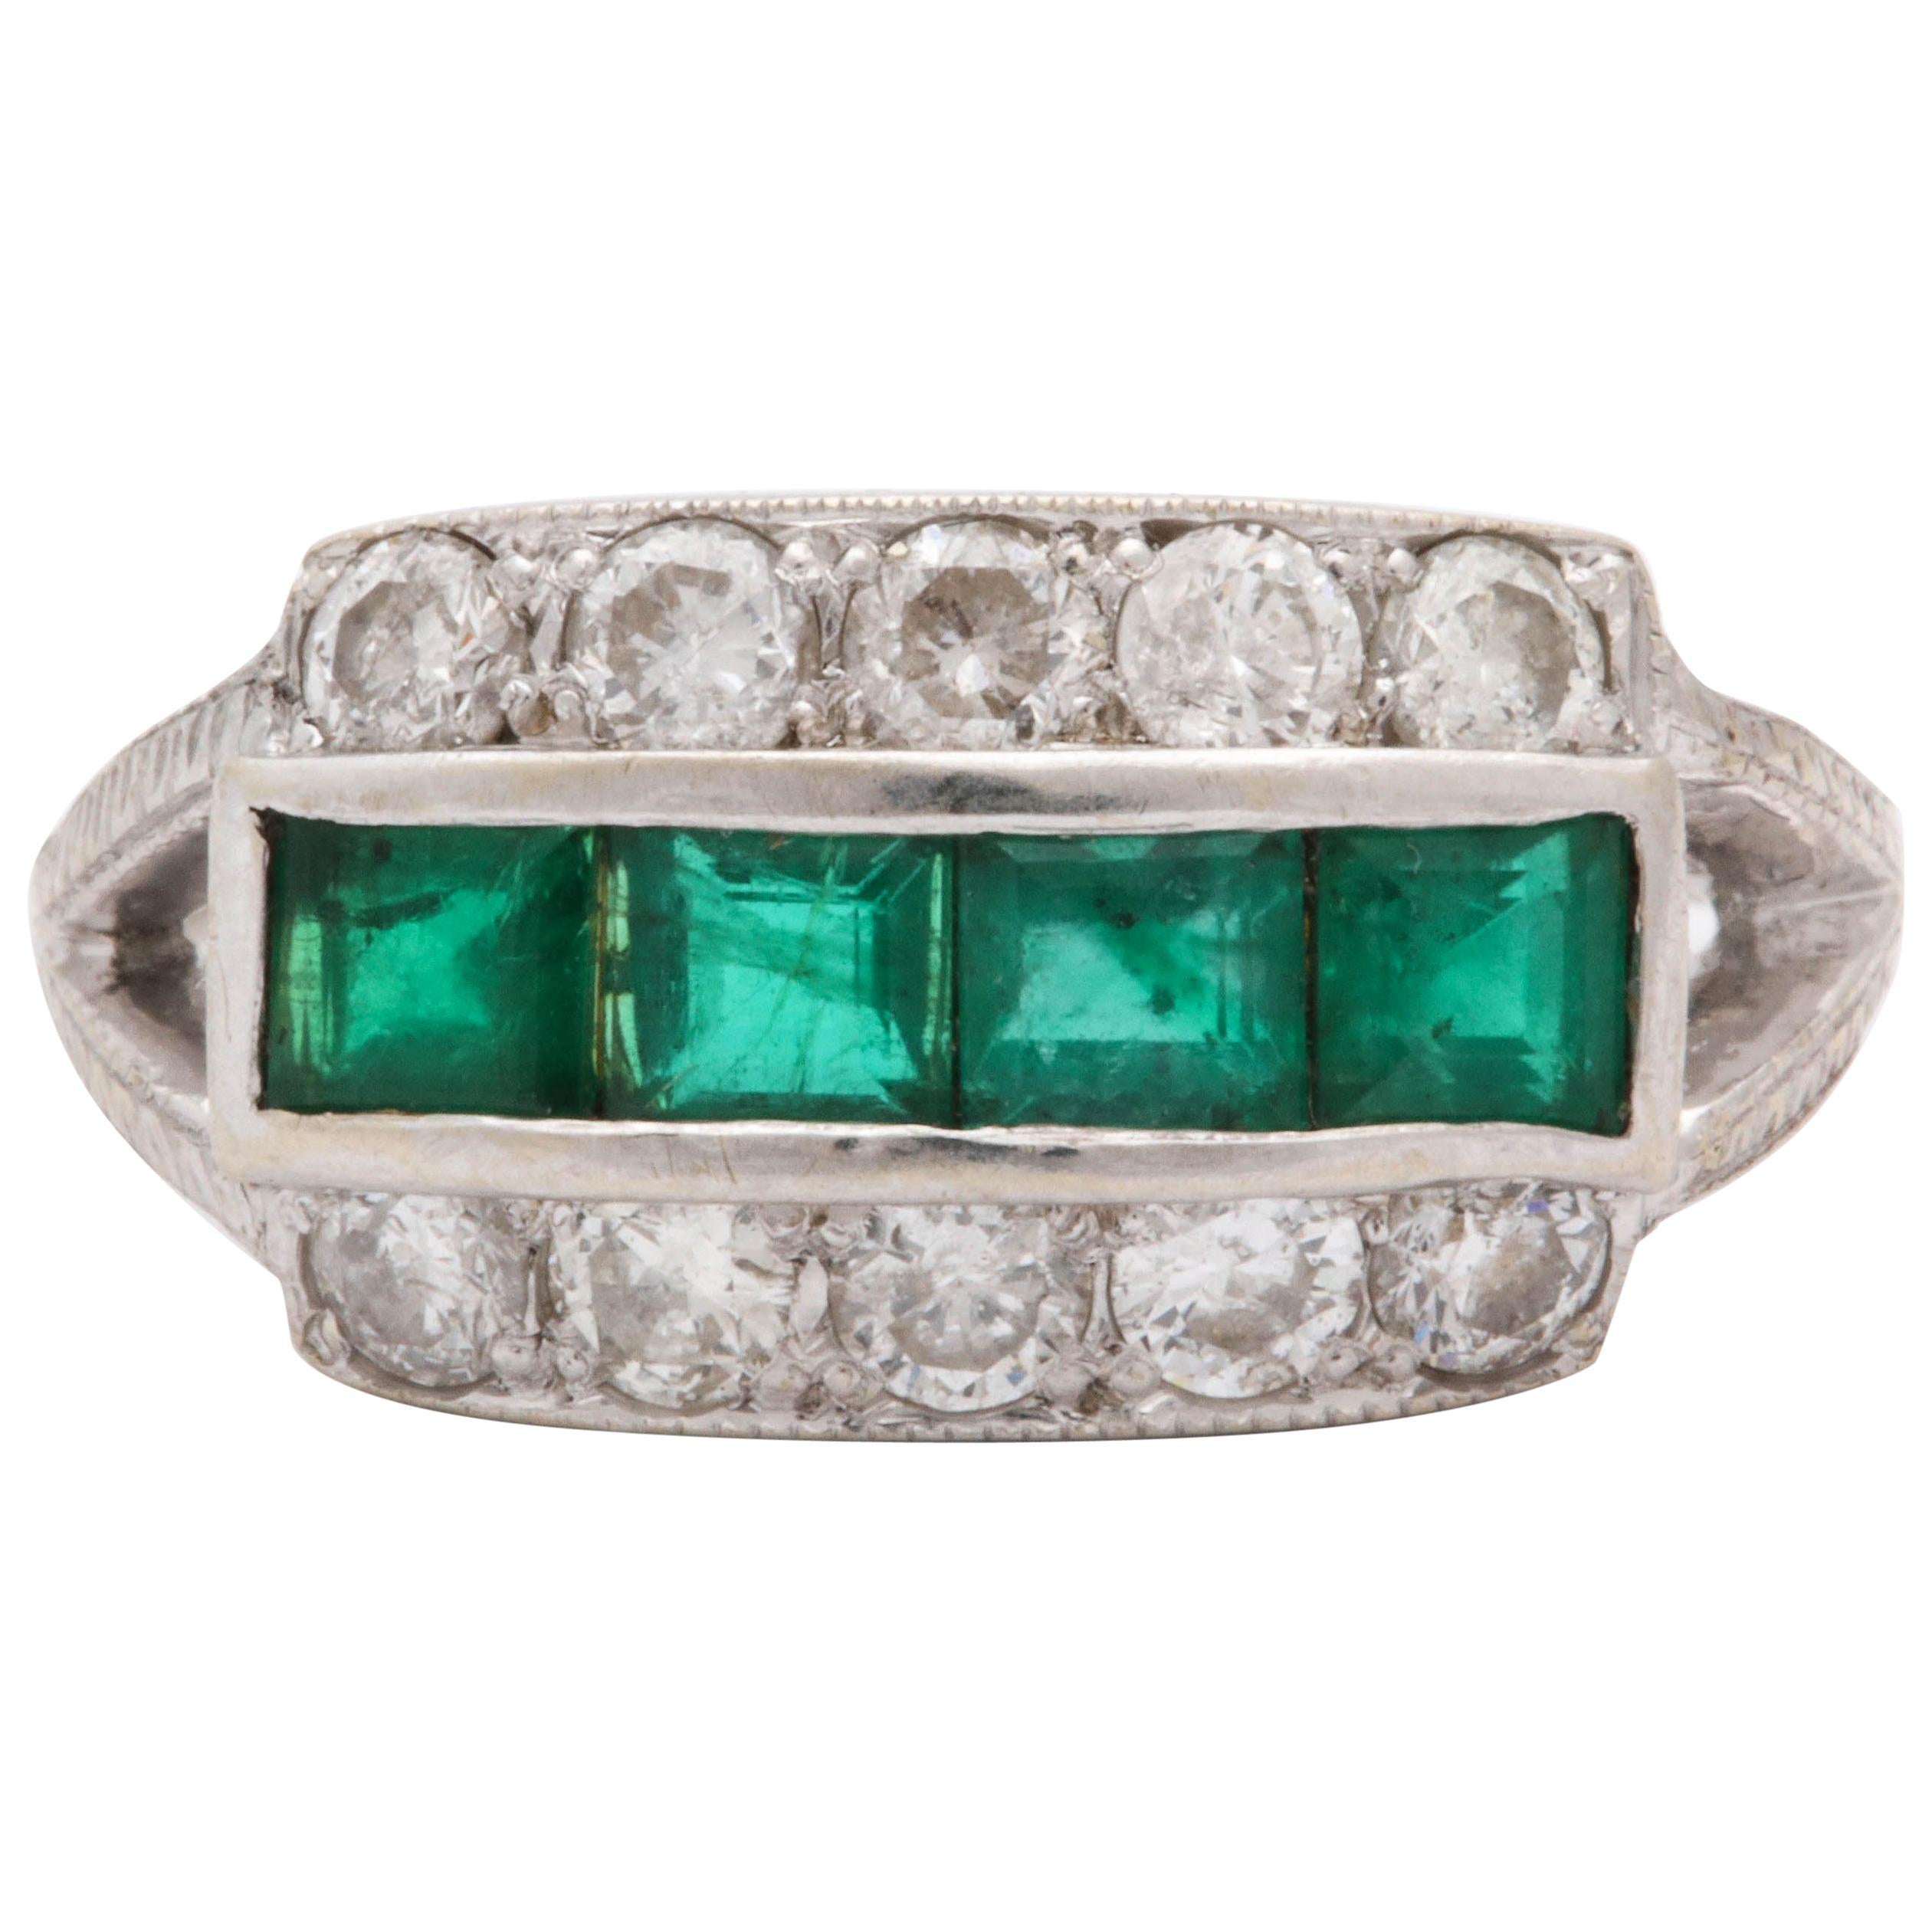 1930s Emerald Cut Emeralds with Diamonds Band Style White Gold Ring